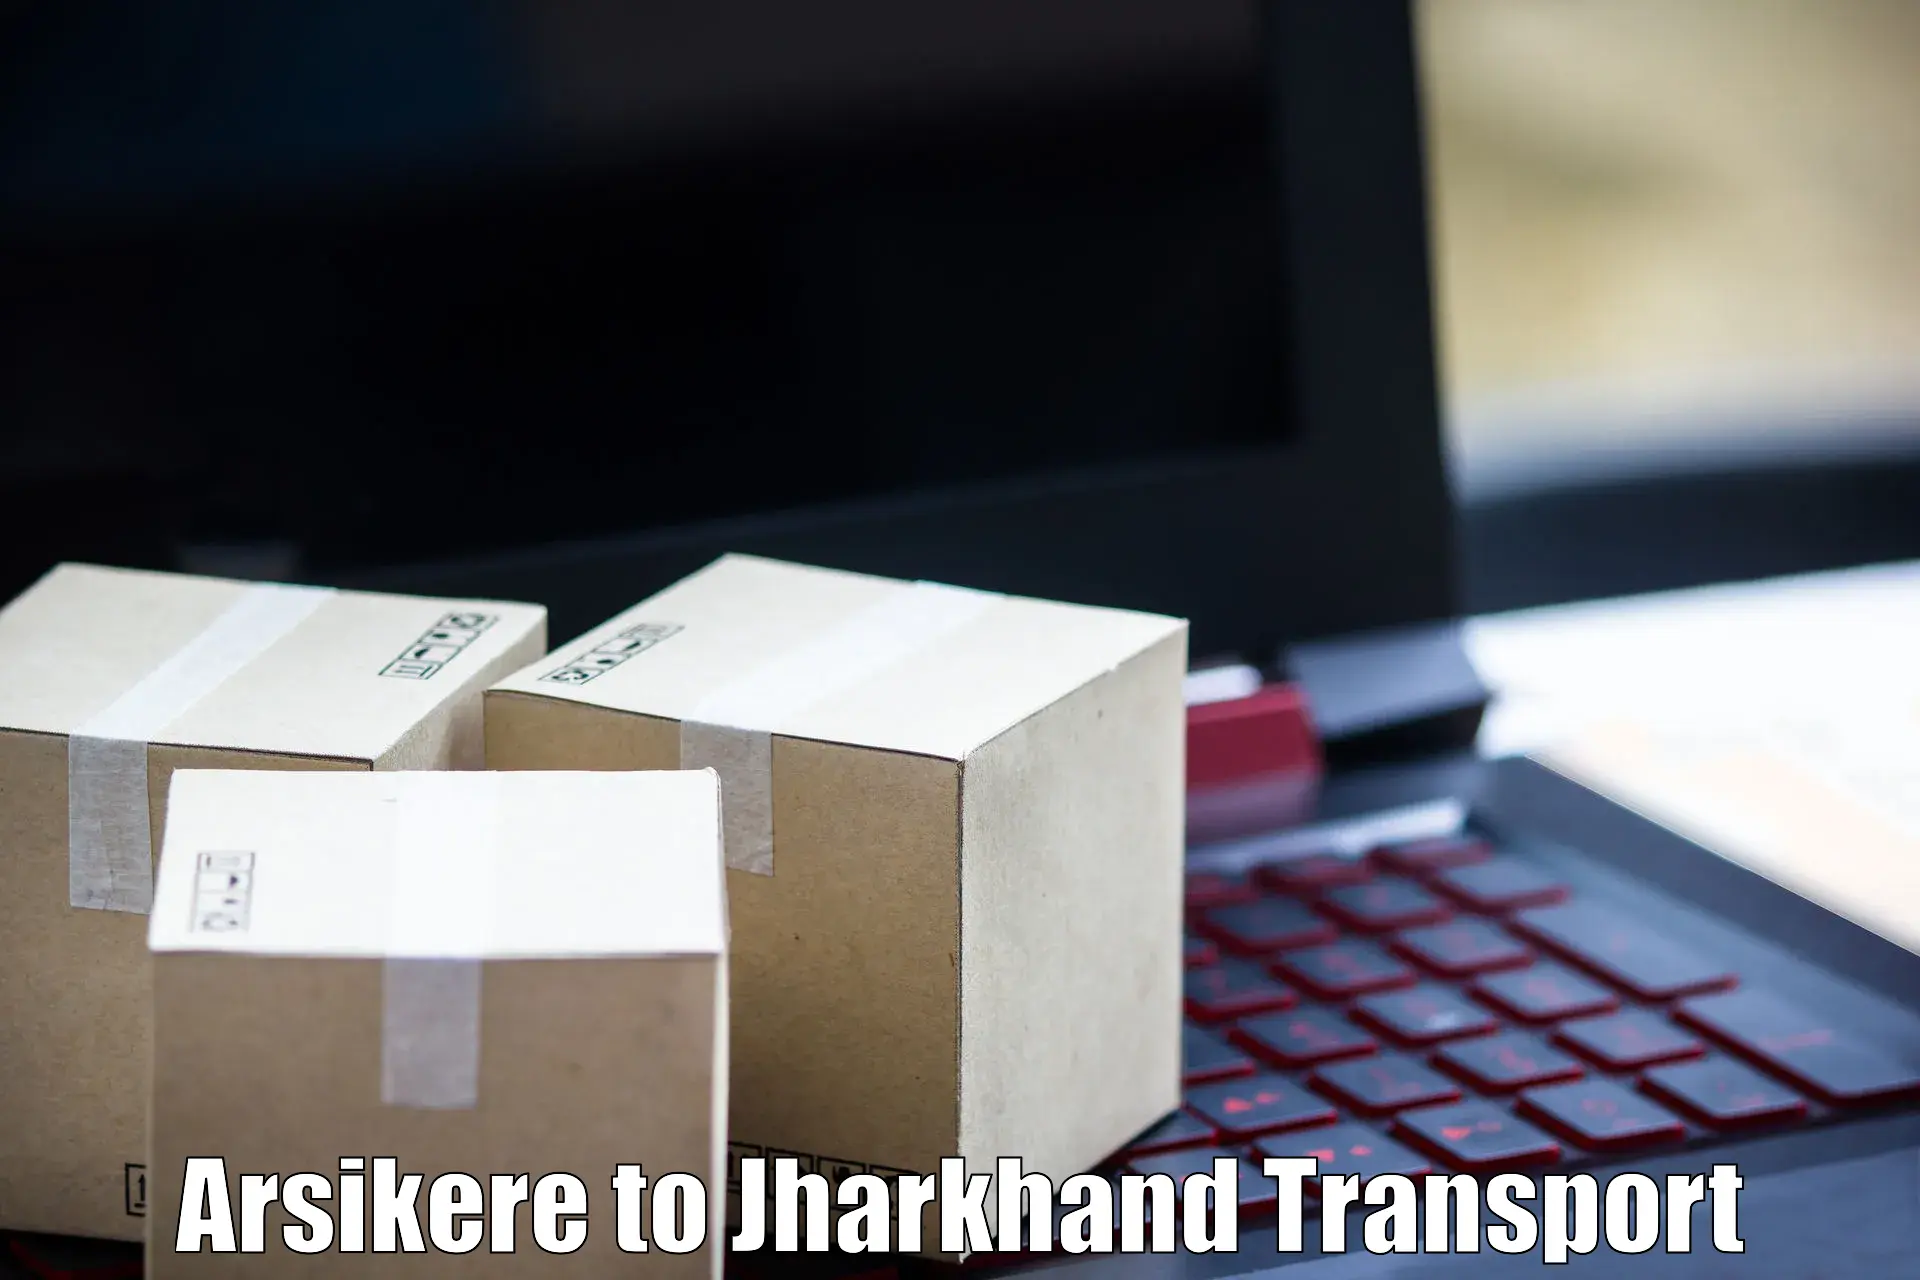 Road transport online services Arsikere to Jharkhand